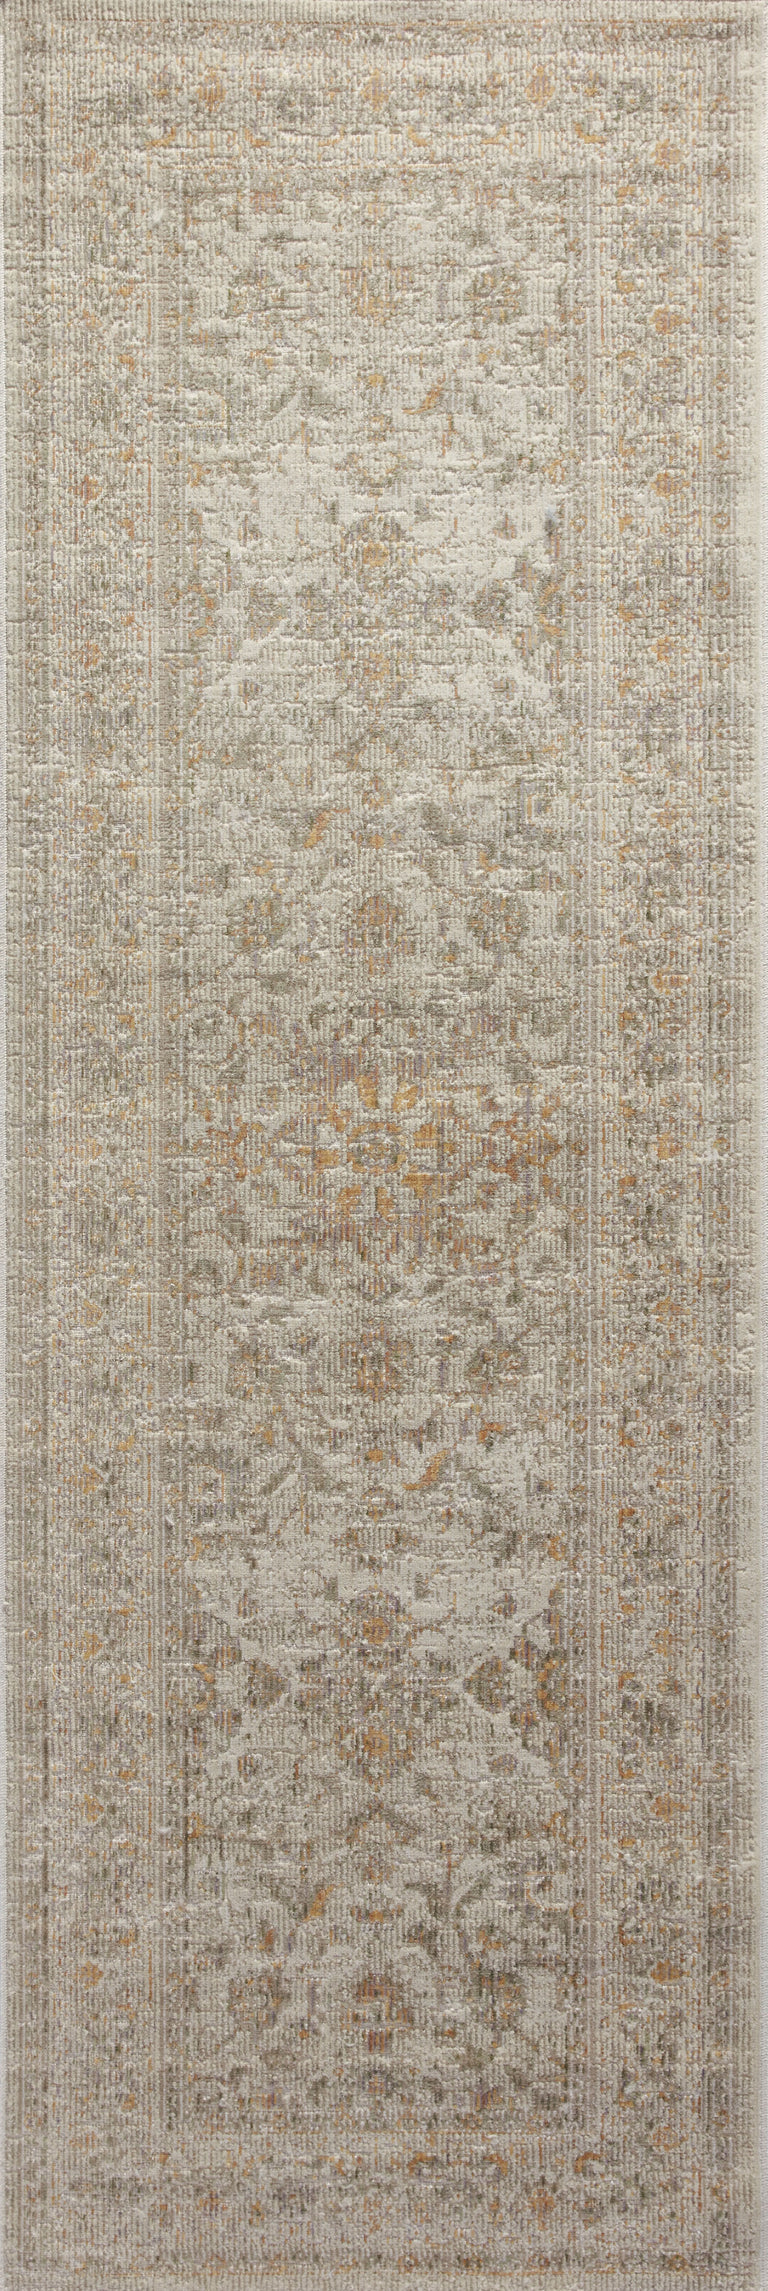 Chris Loves Julia x Loloi Rug in Ivory, Natural - 2'7" x 10'0"